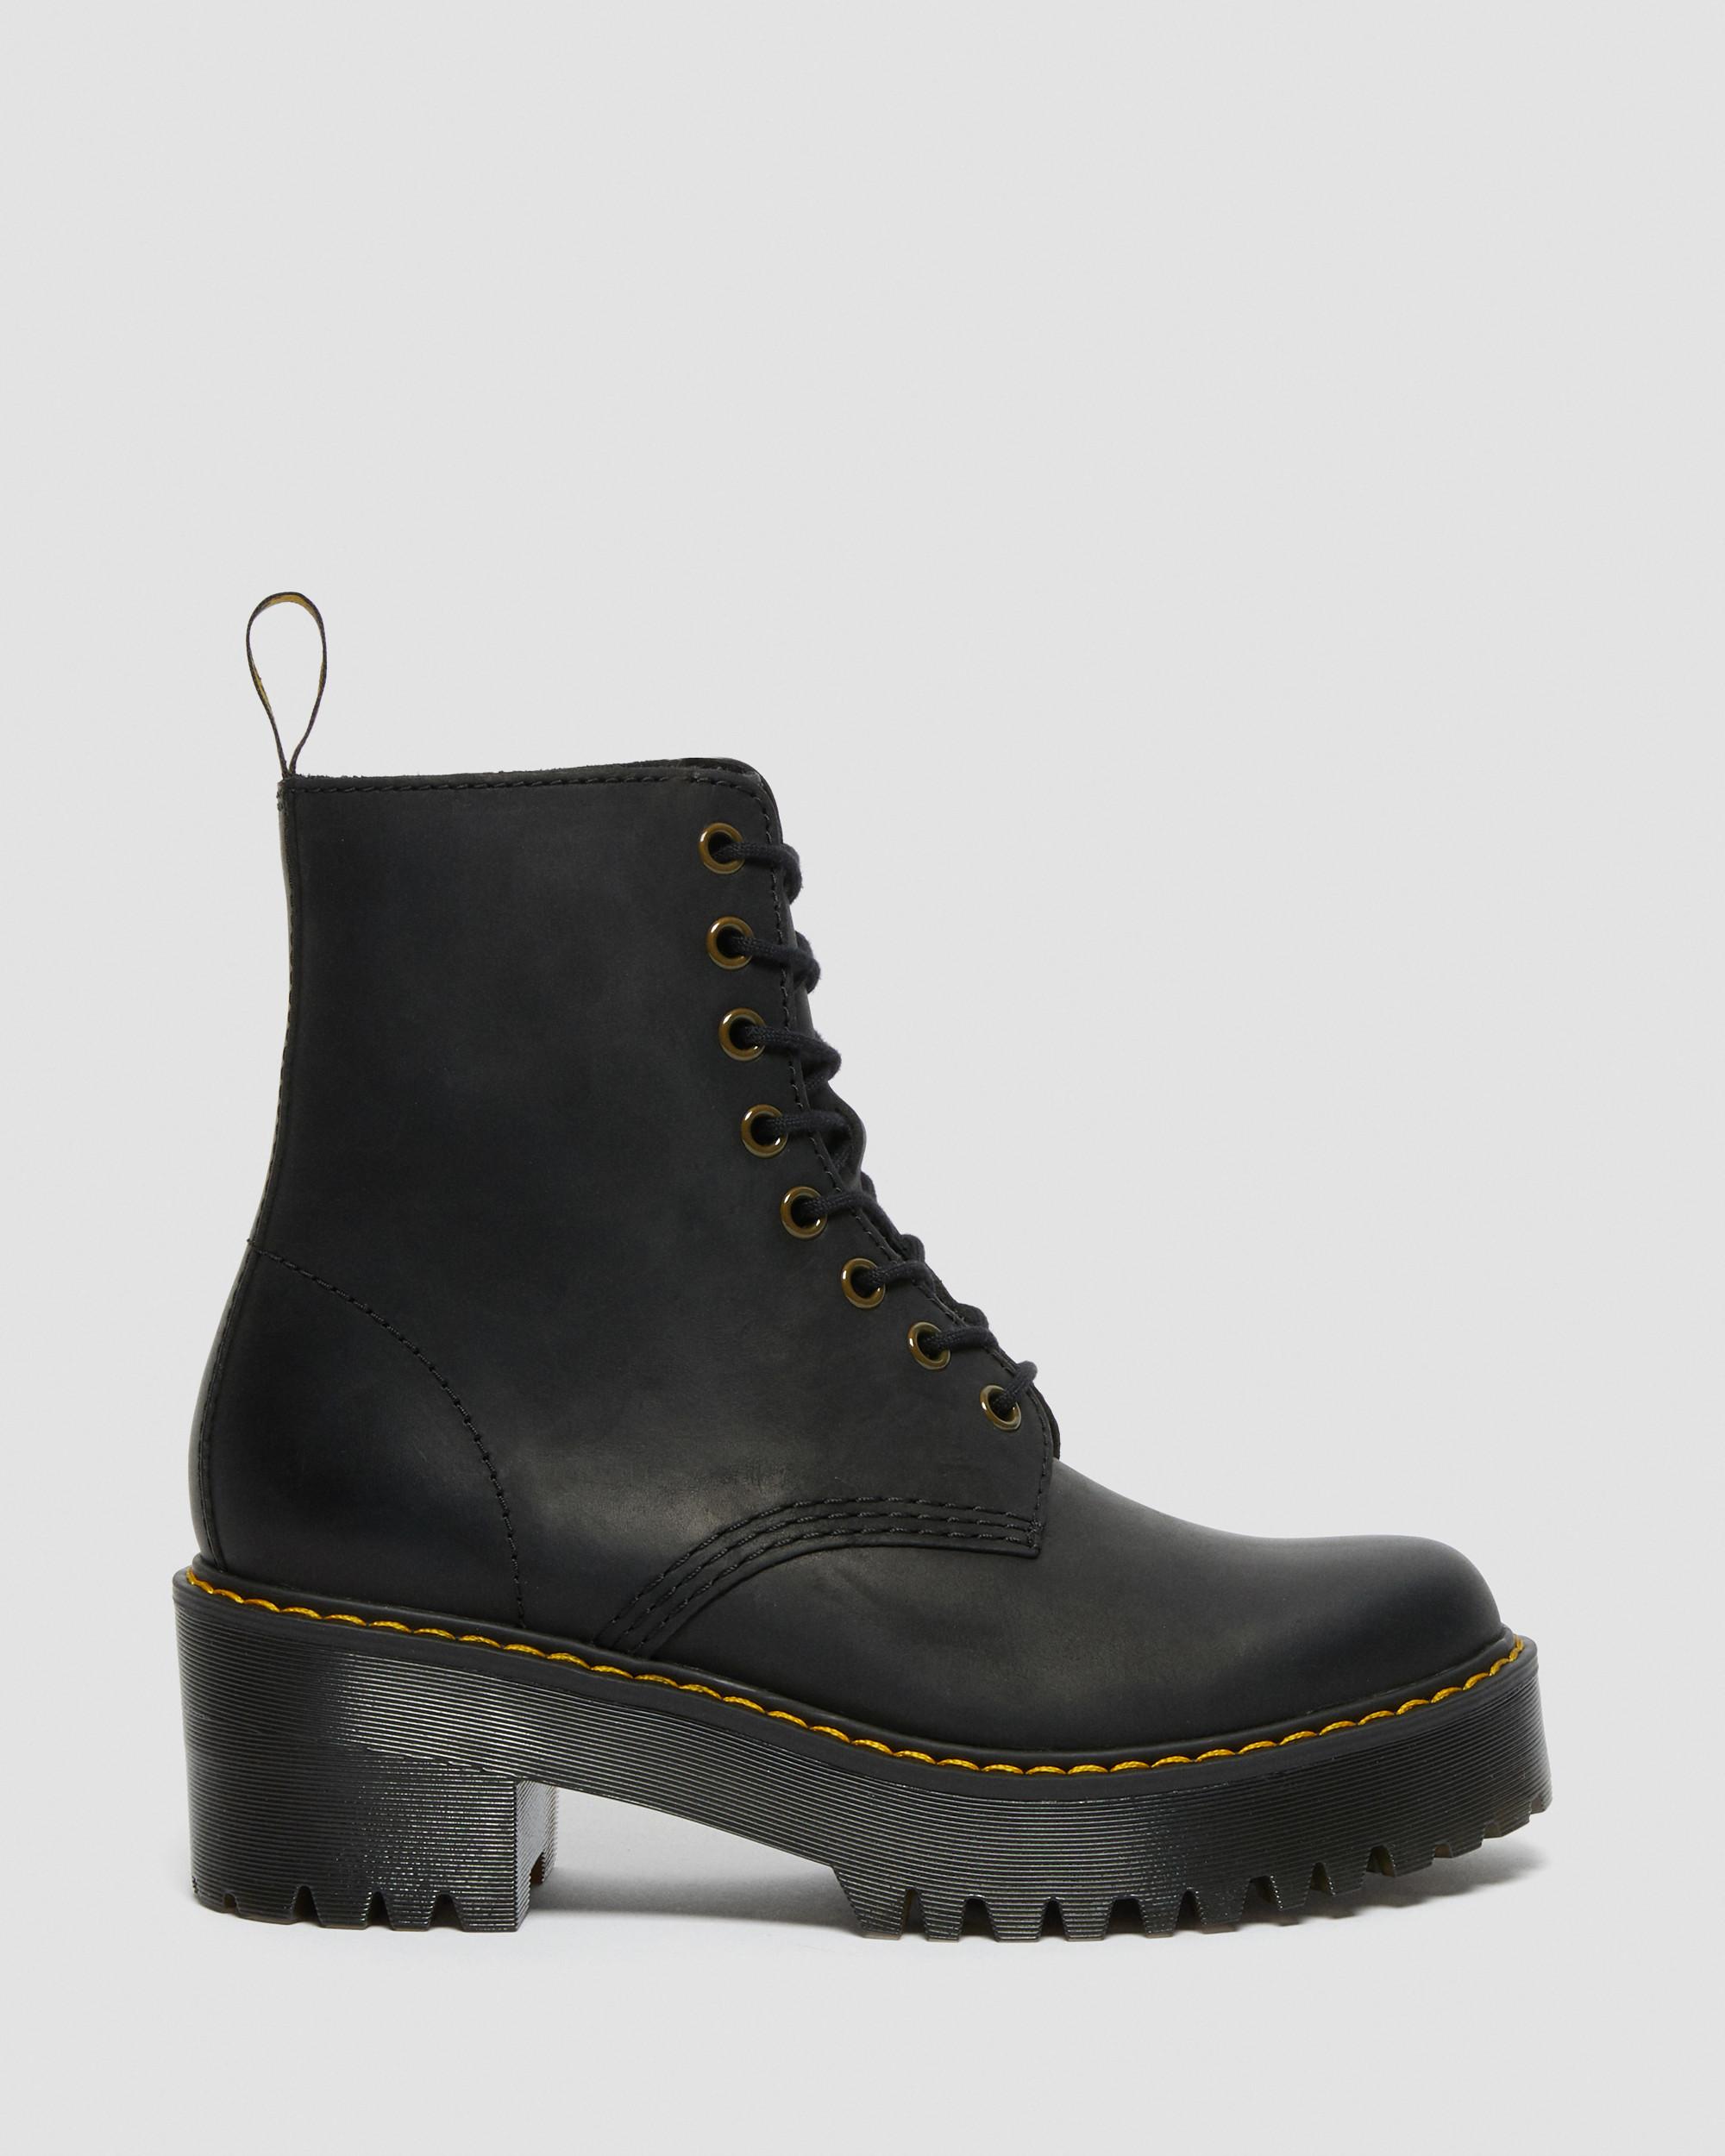 Shriver Hi Women's Wyoming Leather Heeled Boots in Black | Dr. Martens